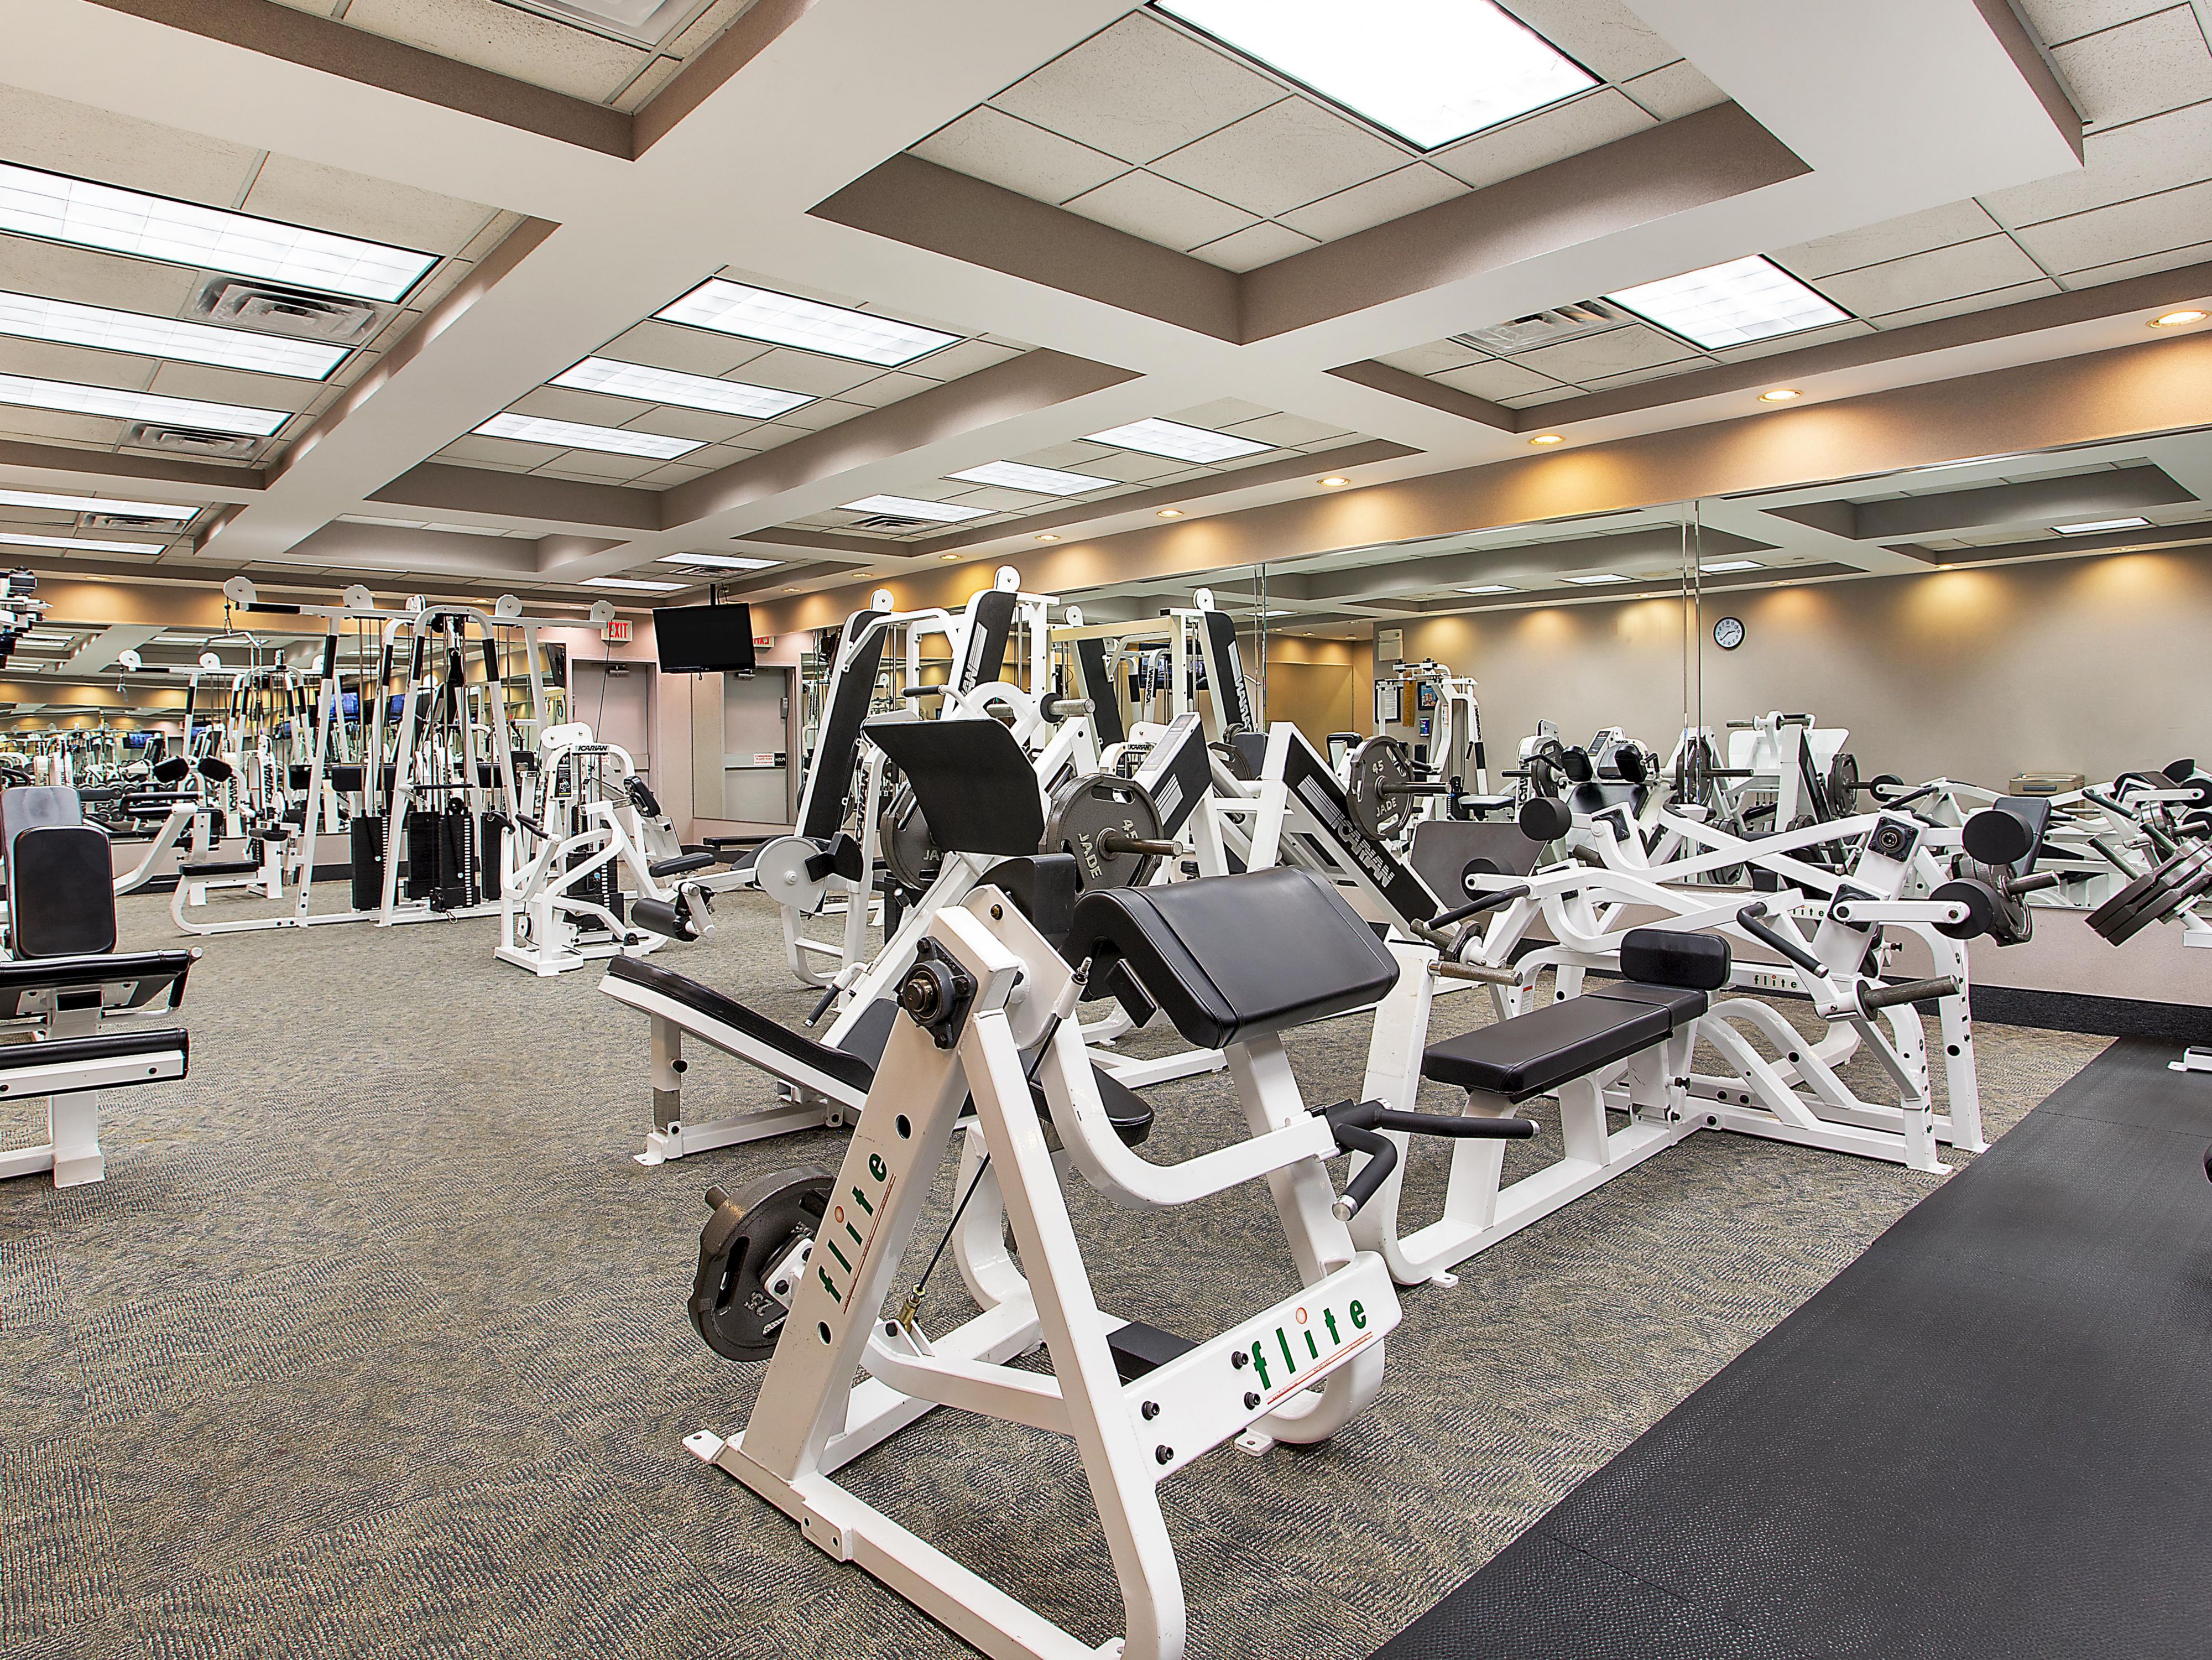 Visit our fitness center to get in a productive workout while on the road. Our two-story gym is open 24/7 and features HD LCD televisions throughout. Fitness equipment includes a Peloton bike, ellipticals, treadmills, stair climbers, and rowing machines, as well as weight machines. Swimmers can also log a few laps in our heated indoor pool.
